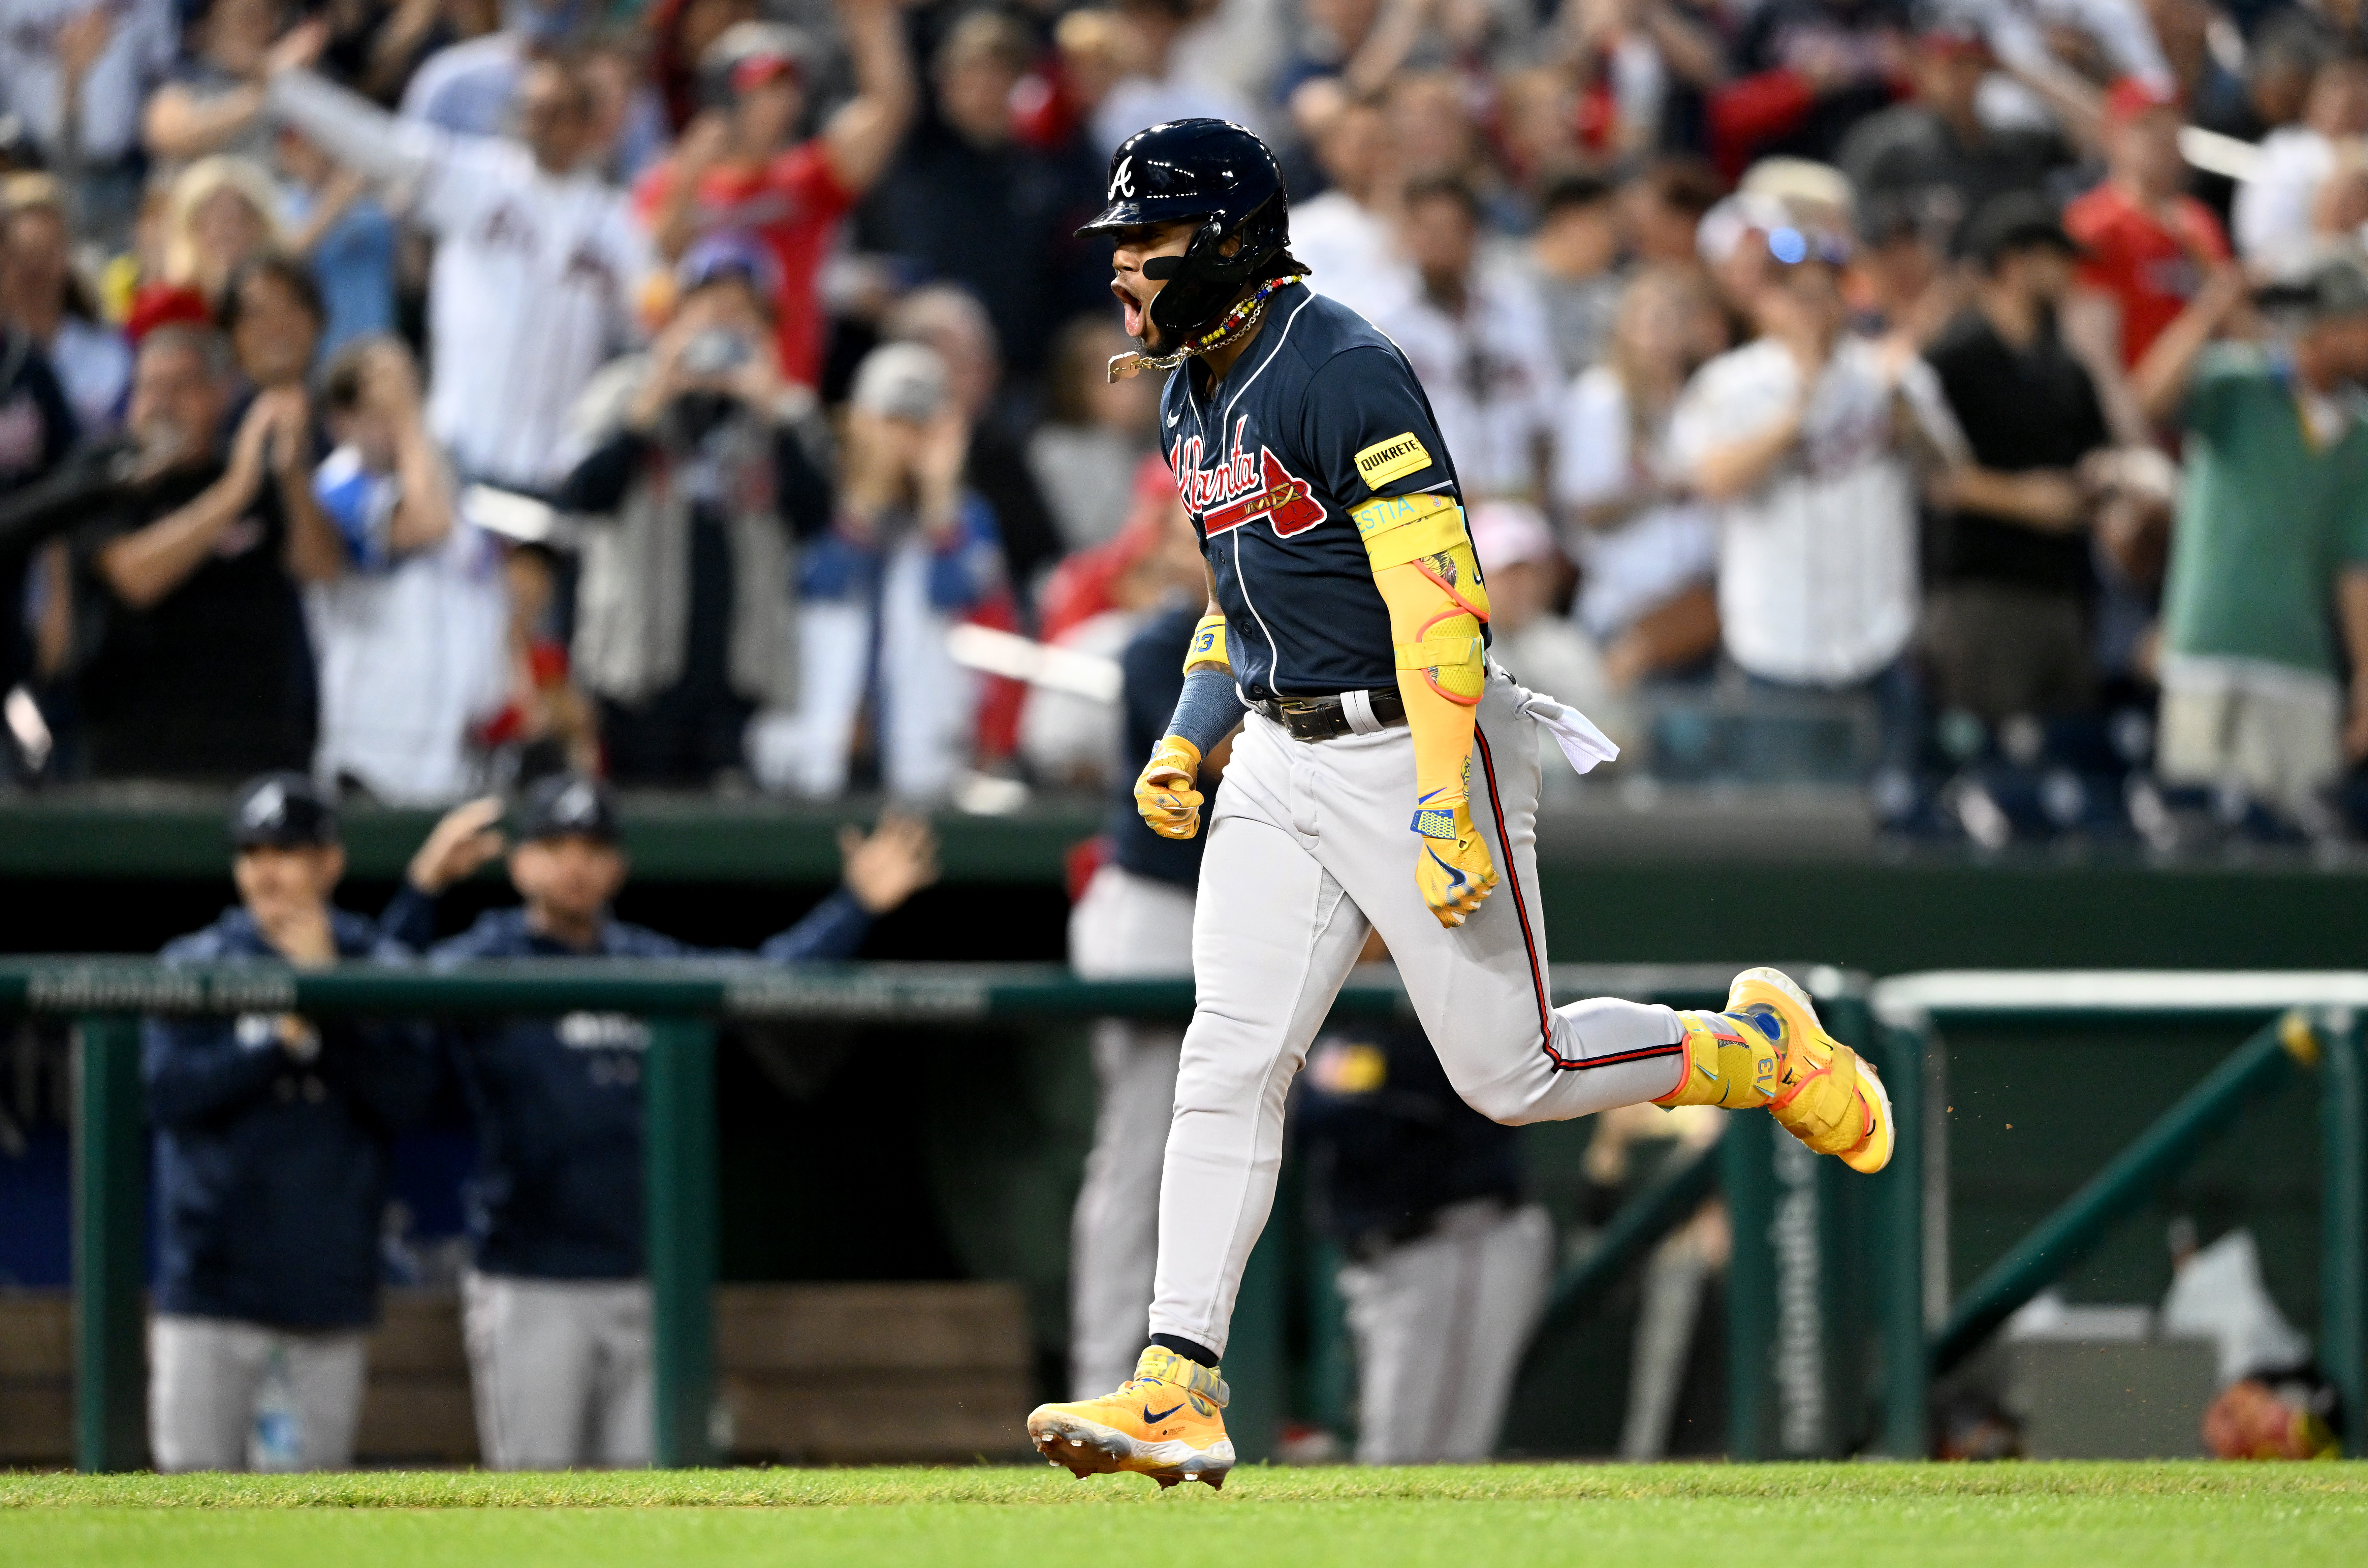 Ronald Acuna Jr. of the Atlanta Braves celebrates after hitting a home run during the first inning in the game against the Washington Nationals at Nationals Park in Washington, D.C., September 22, 2023. /CFP